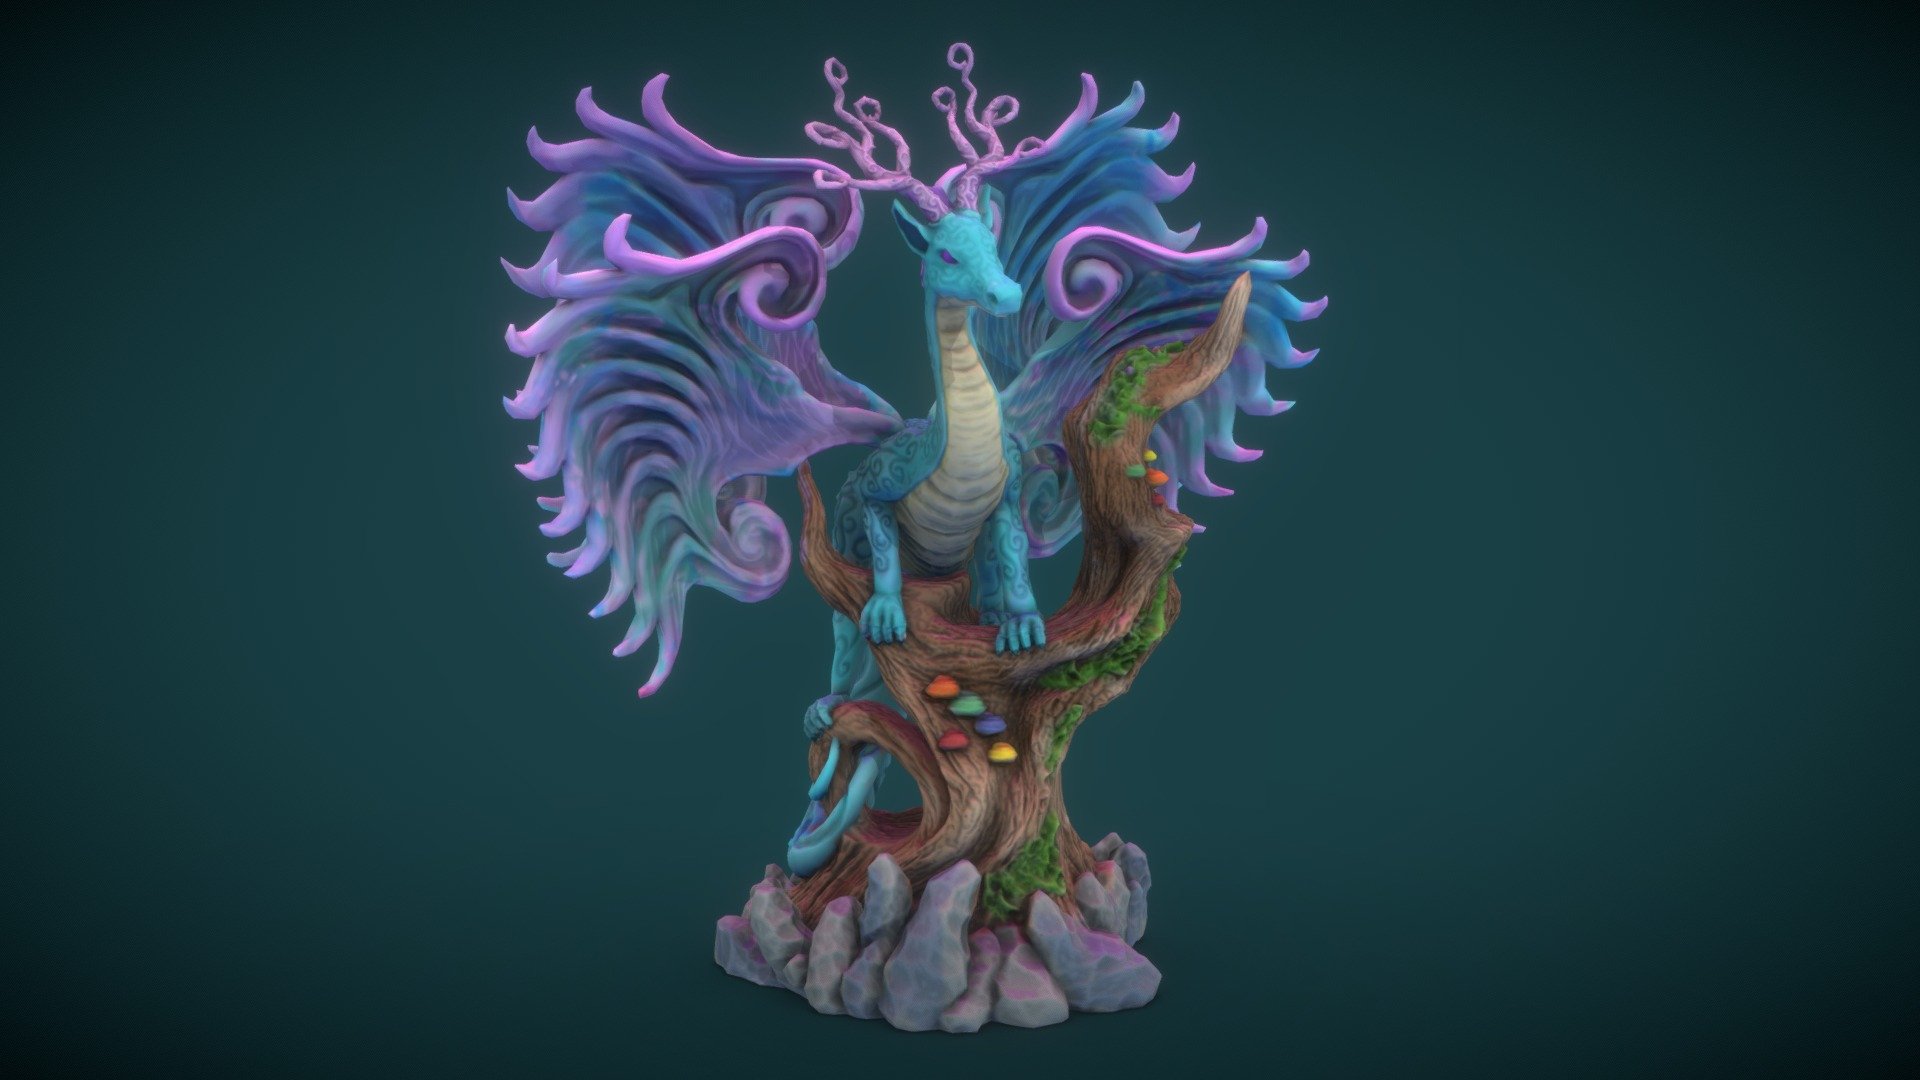 FREE! - 3D Dragon Model: Mythical Creatures in Augmented Reality